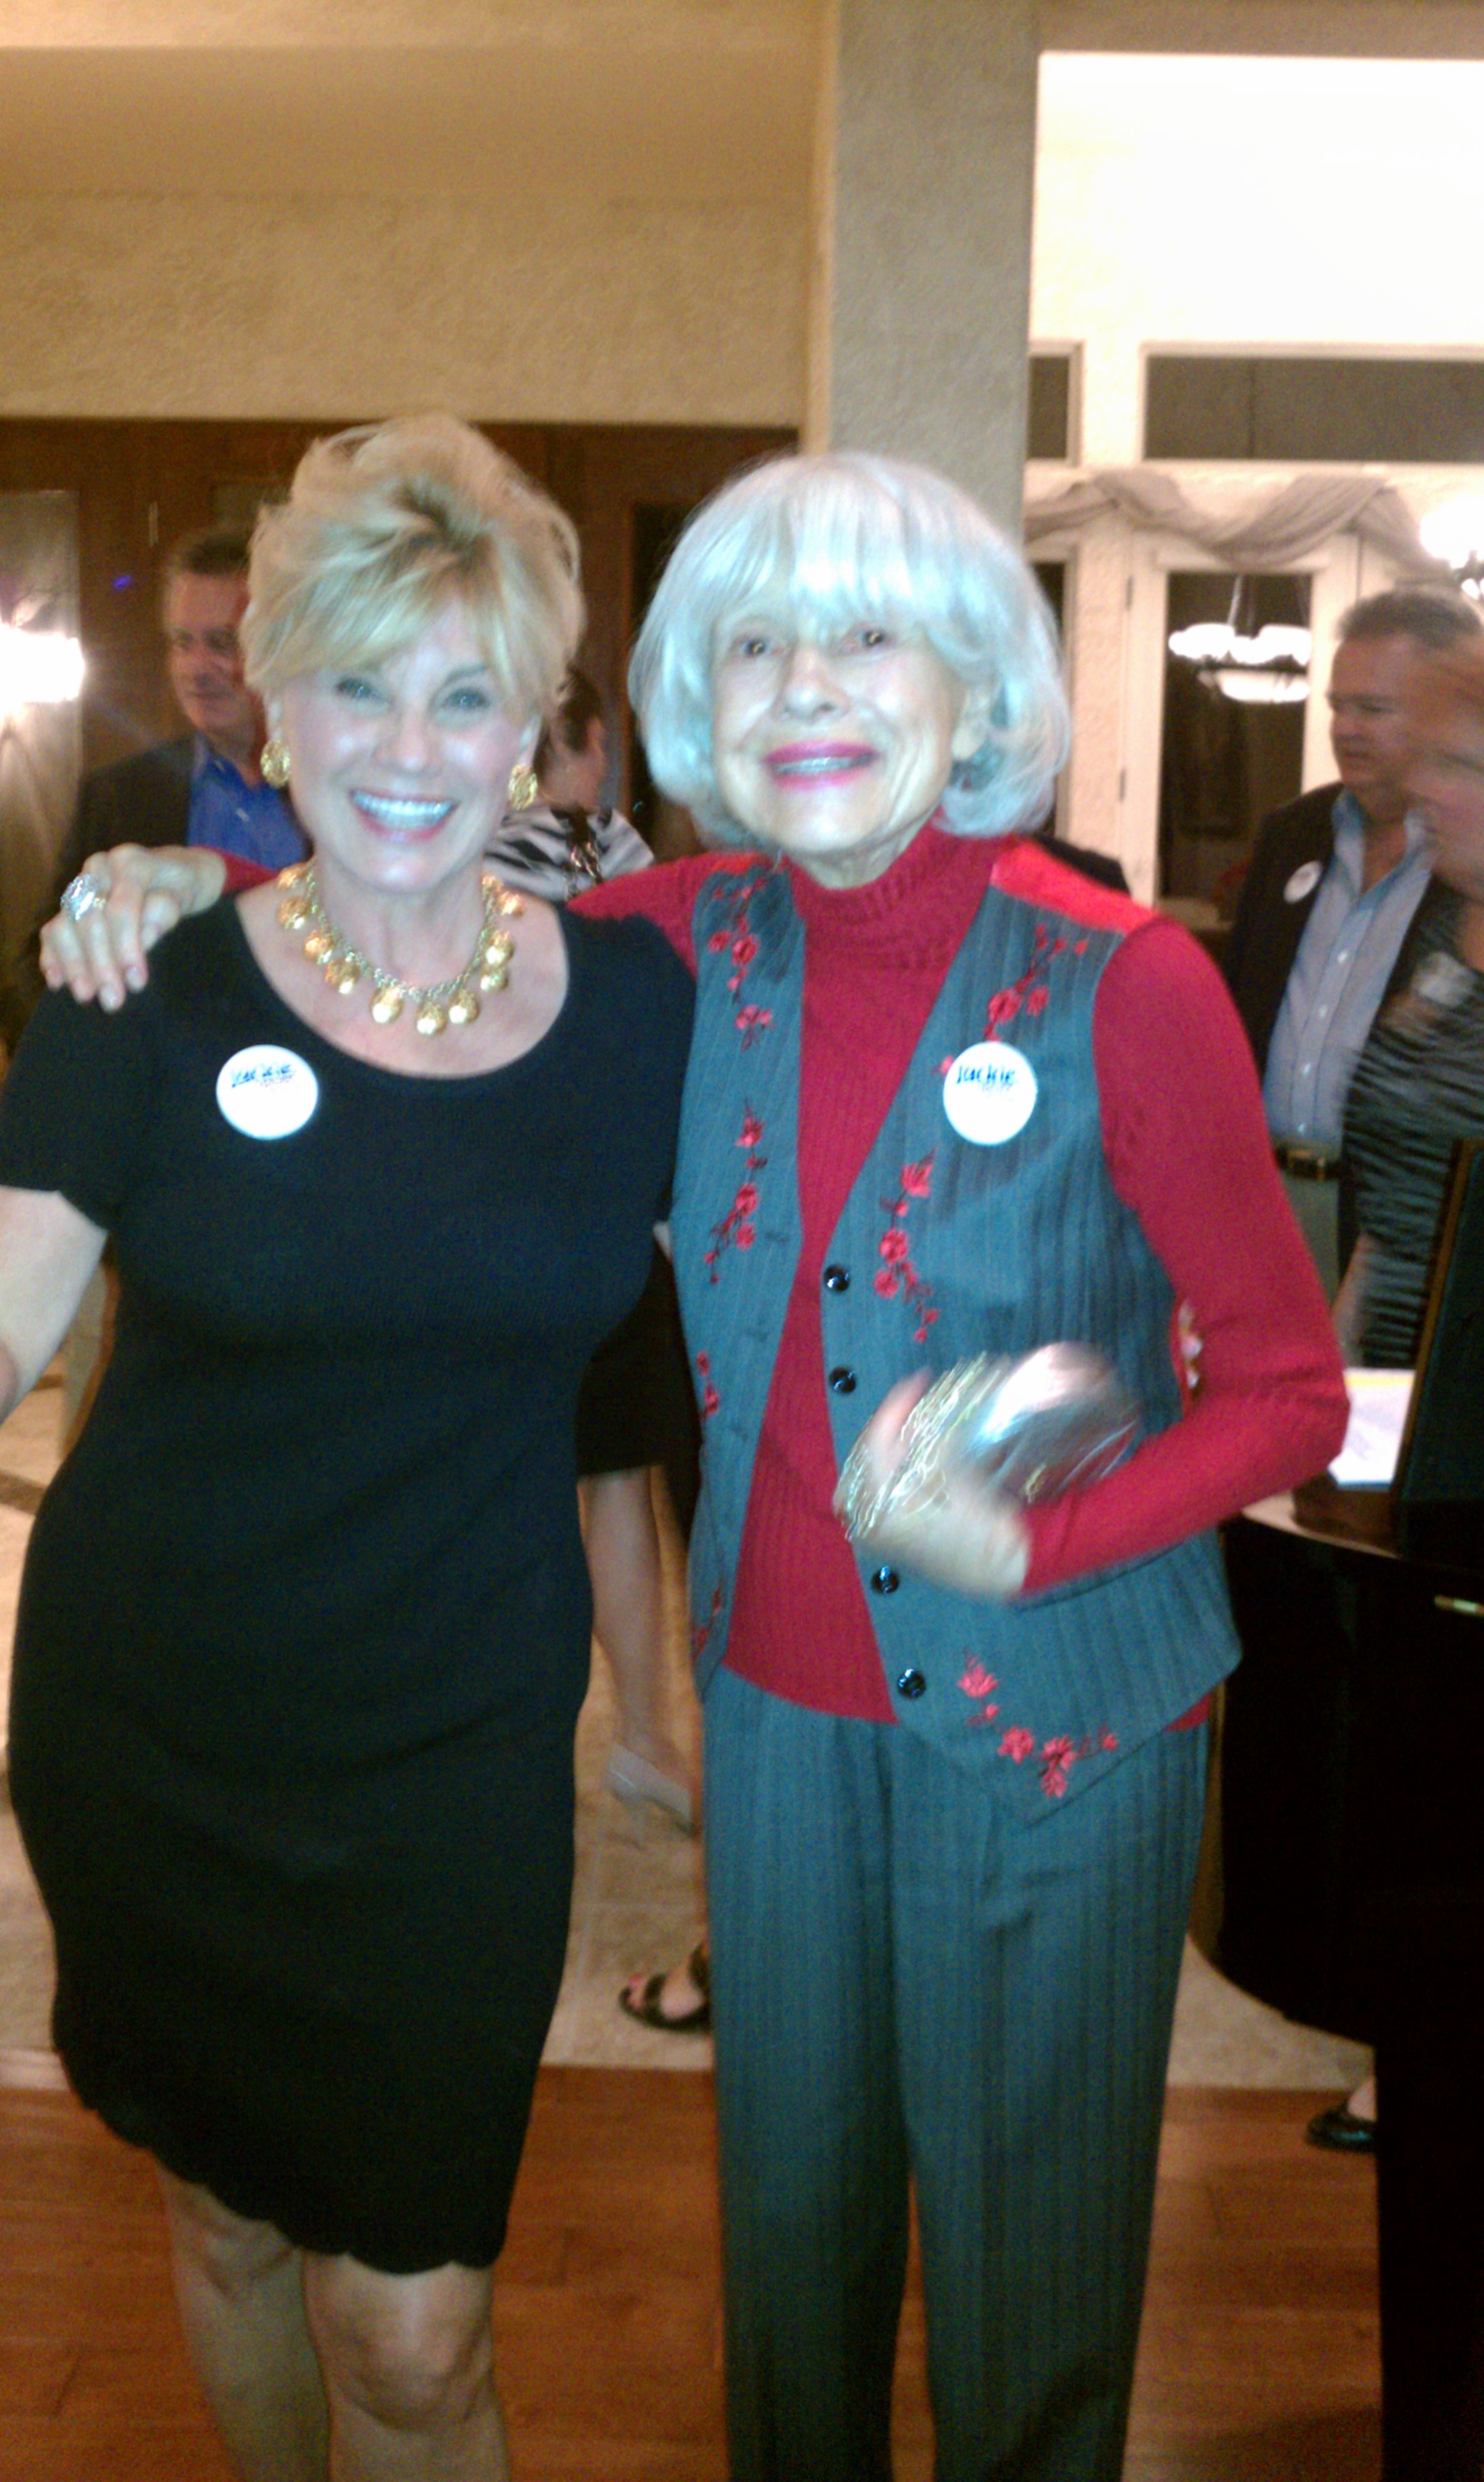 With Carol Channing!